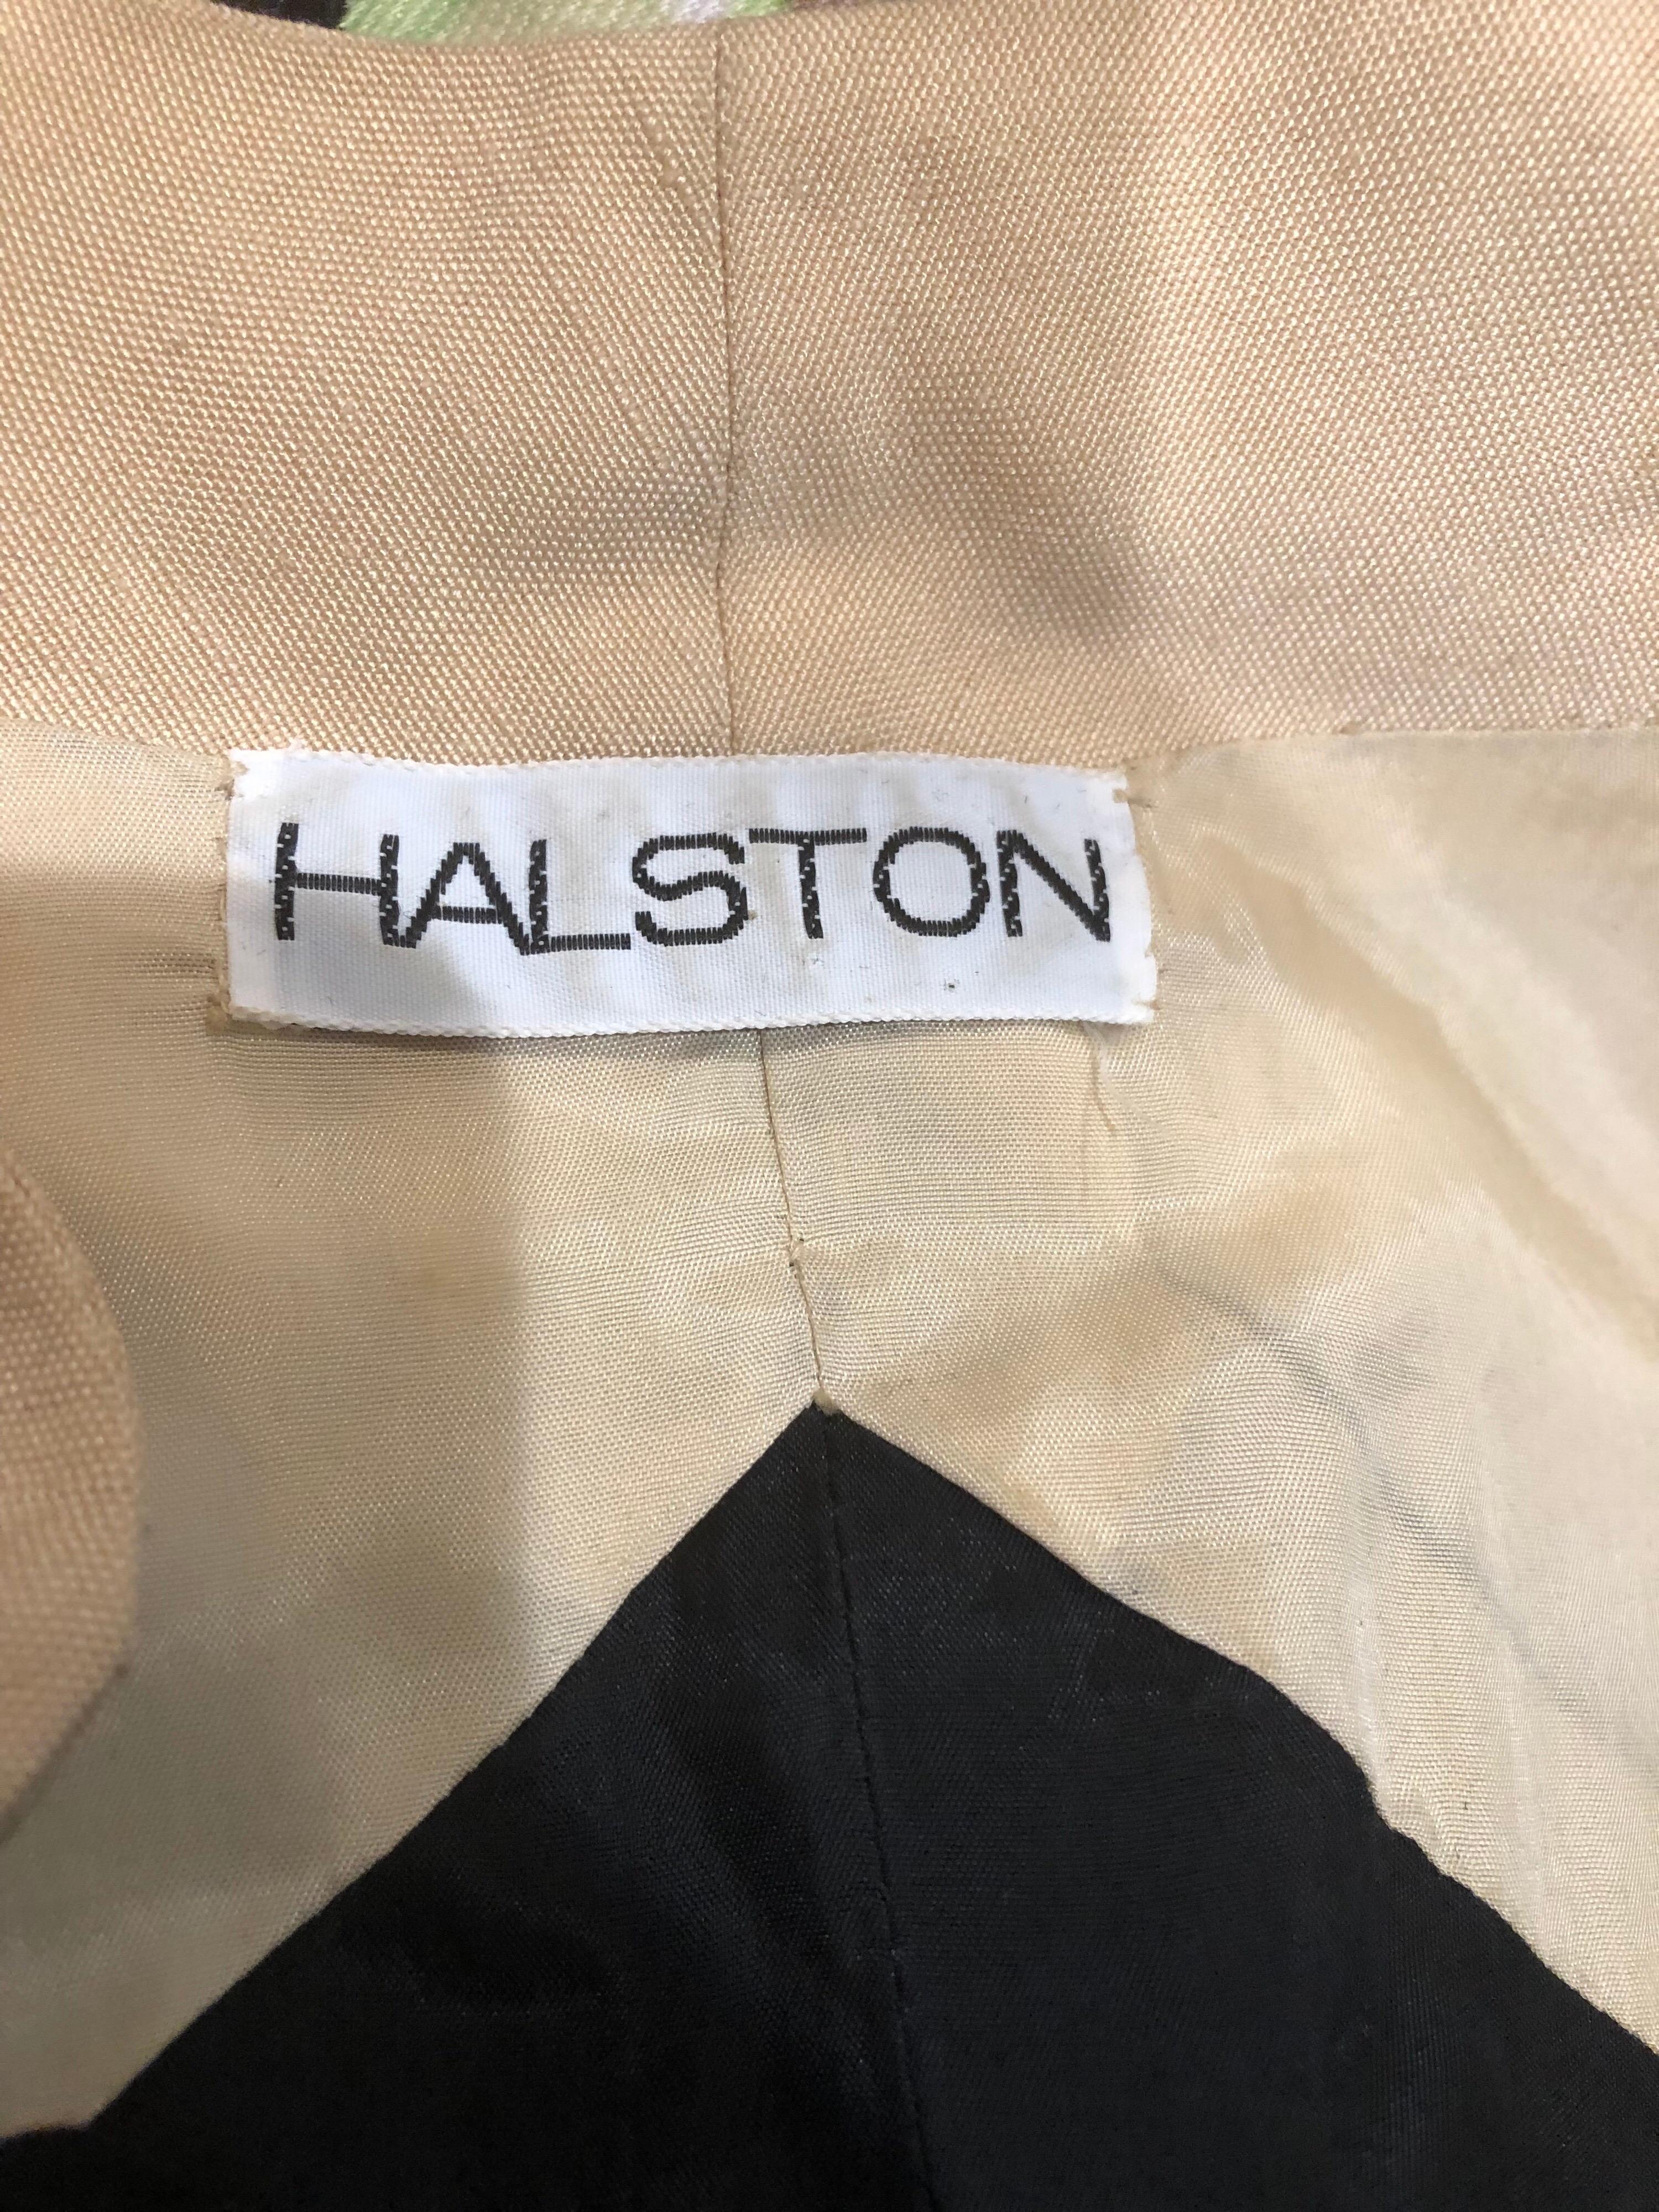 Rare 1970s HALSTON black and khaki optical illusion trapeze dress! Khaki top portion looks as if a bolero jacket is being worn over a black strapless dress. Flattering trapeze style looks amazing on an array of shapes and sizes. Buttons up the